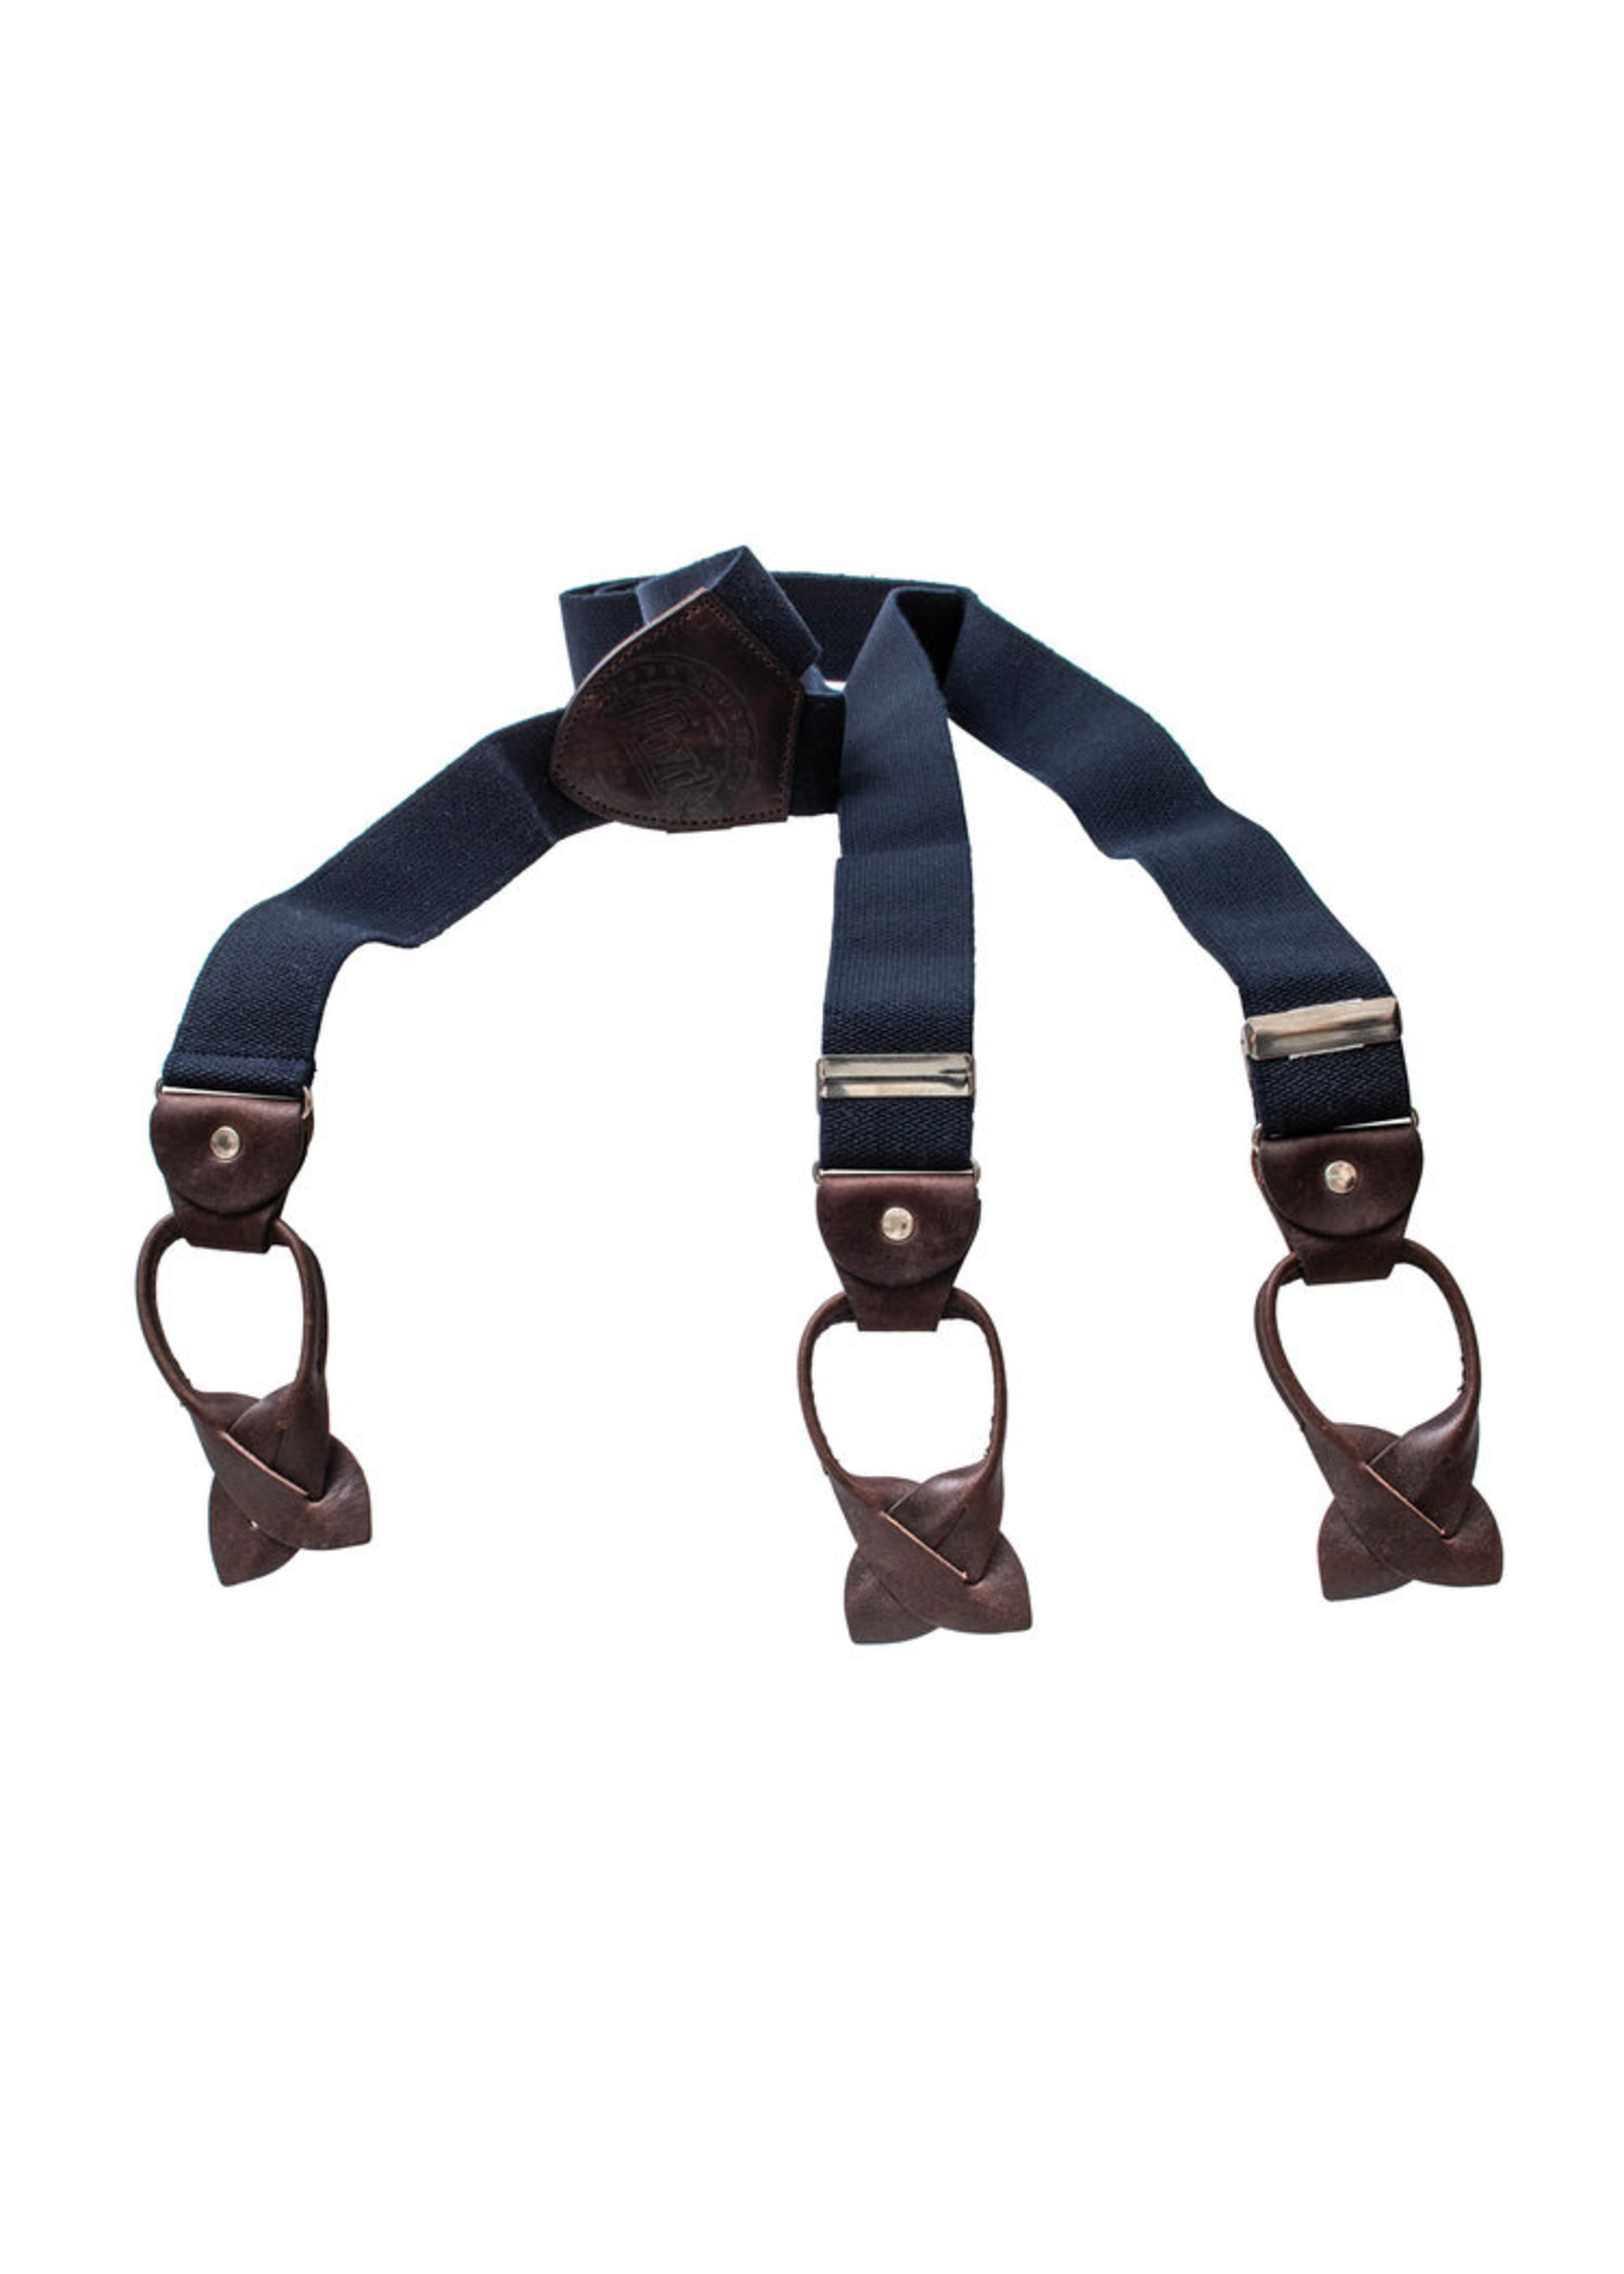 LLOYD Men's ajustable suspenders with leather